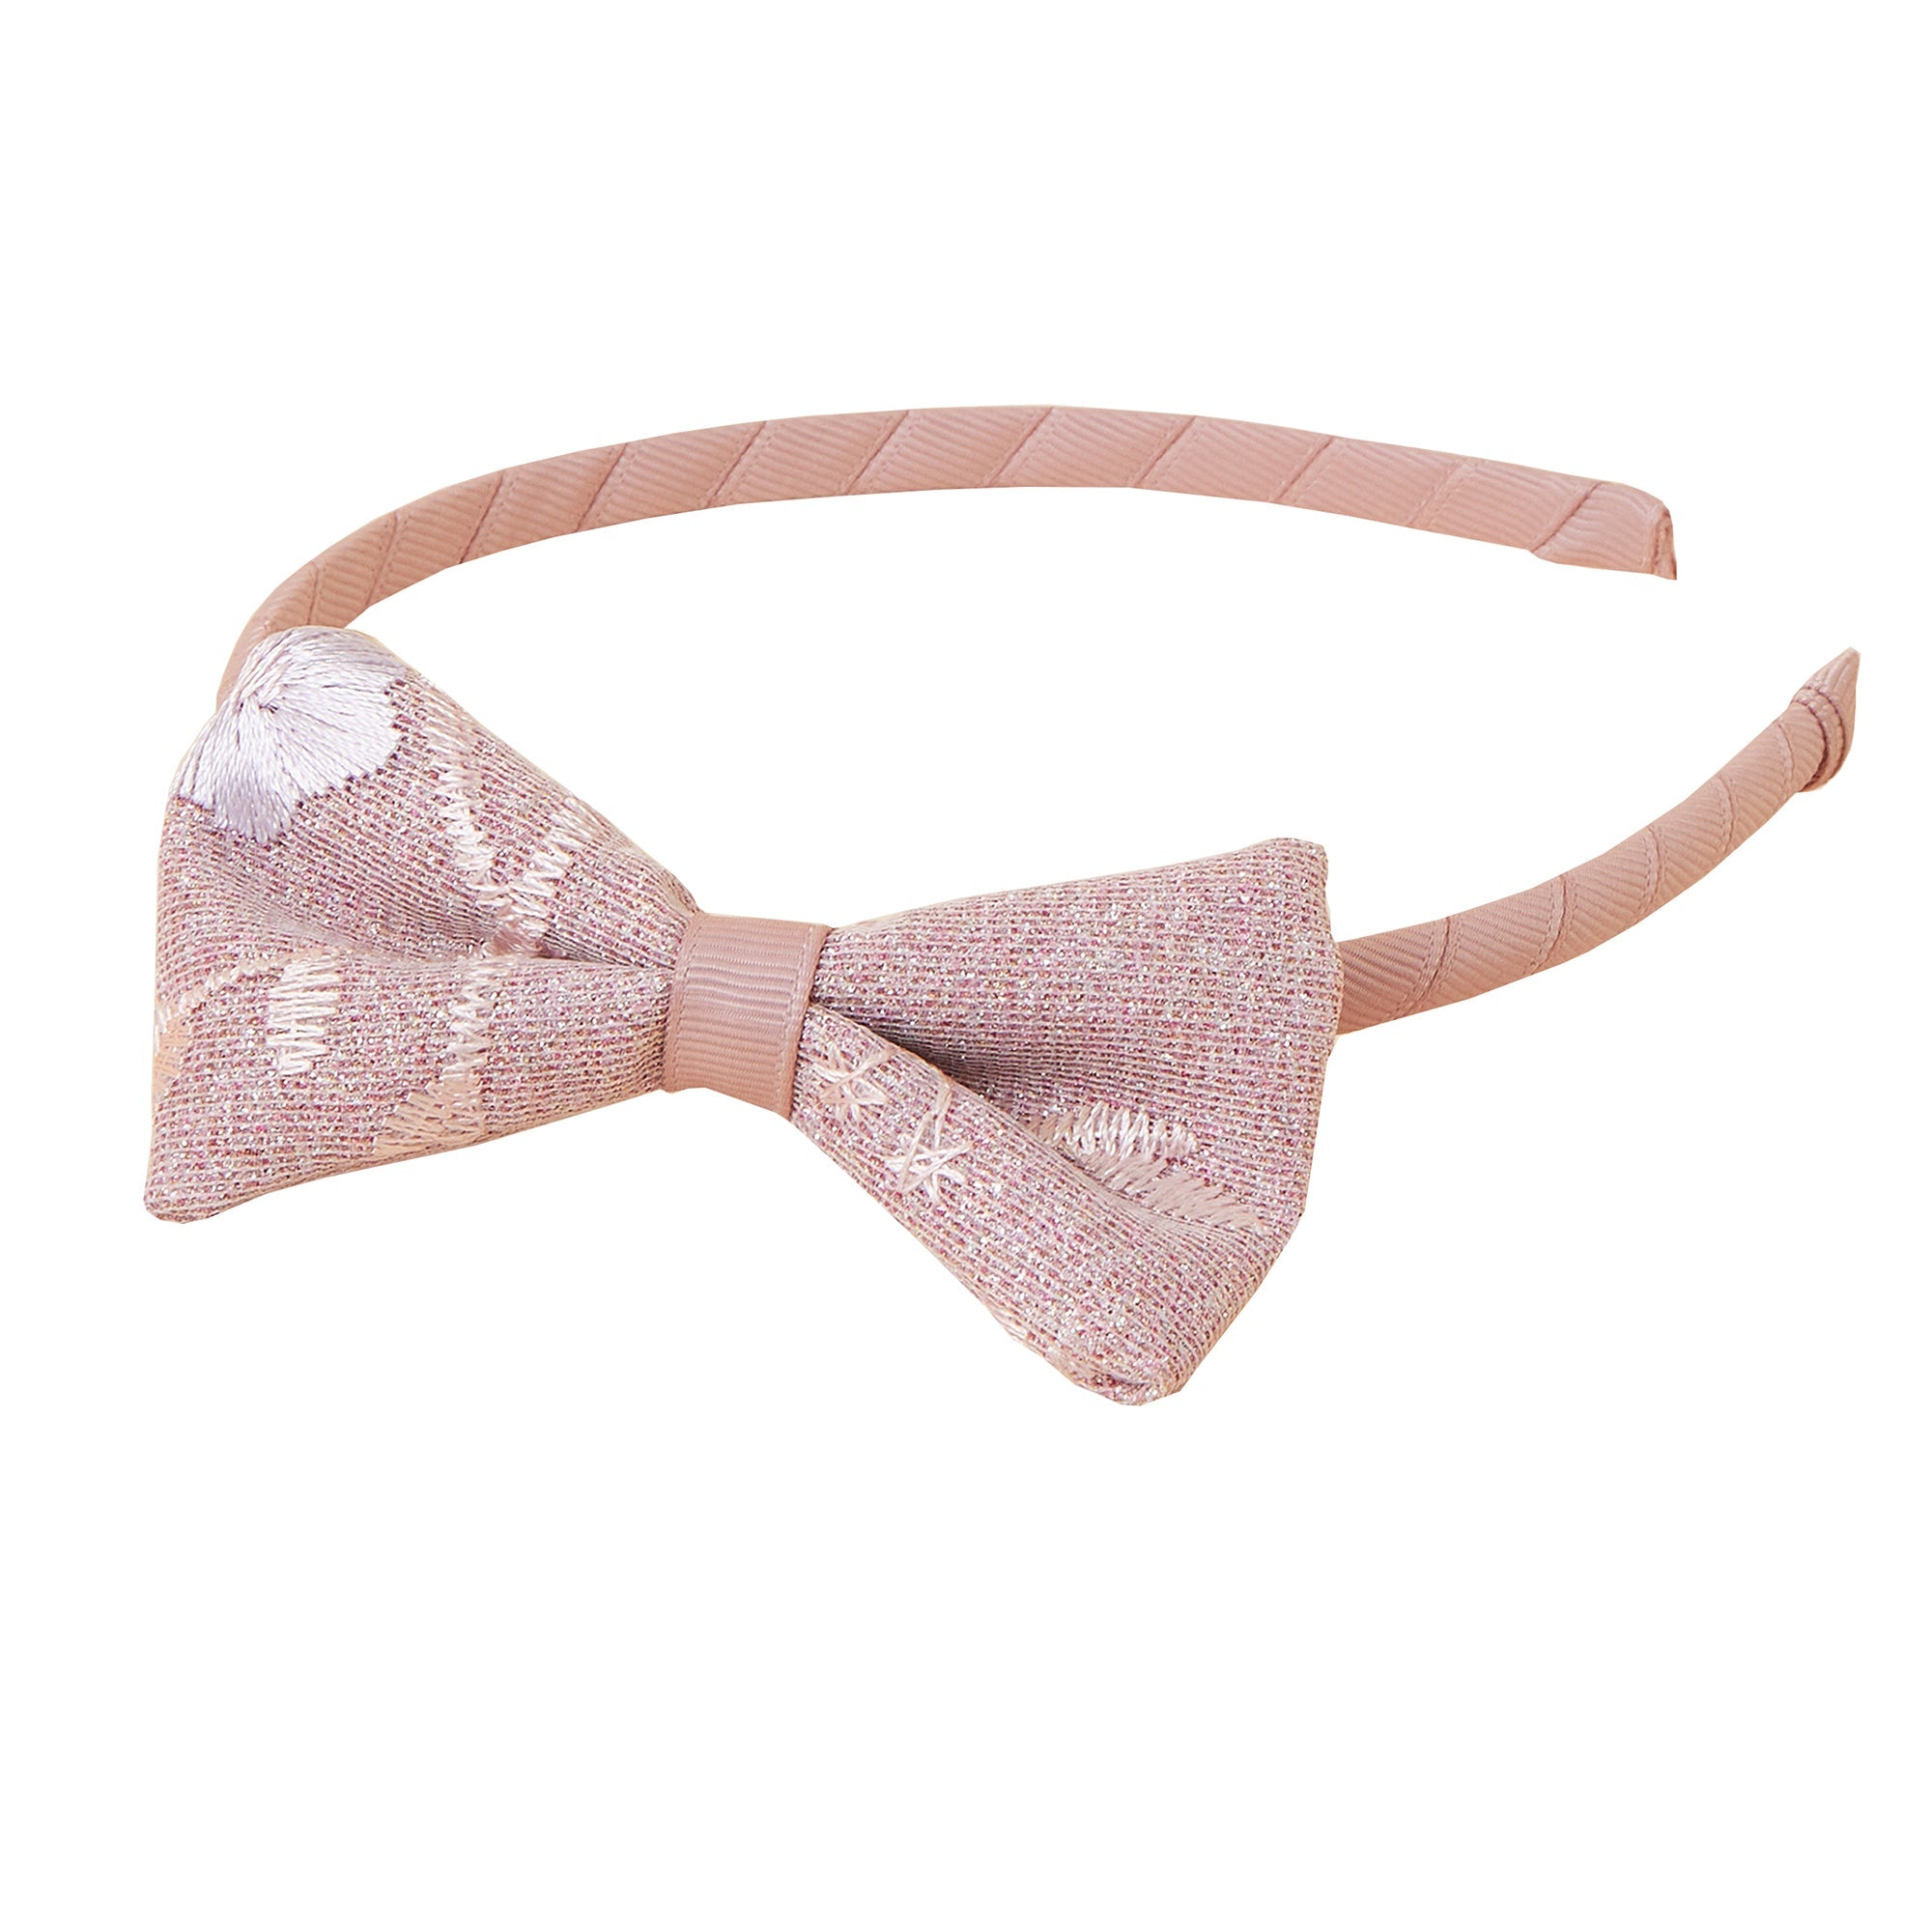 Accessorize London Girl's R Lace Bow Alice Band